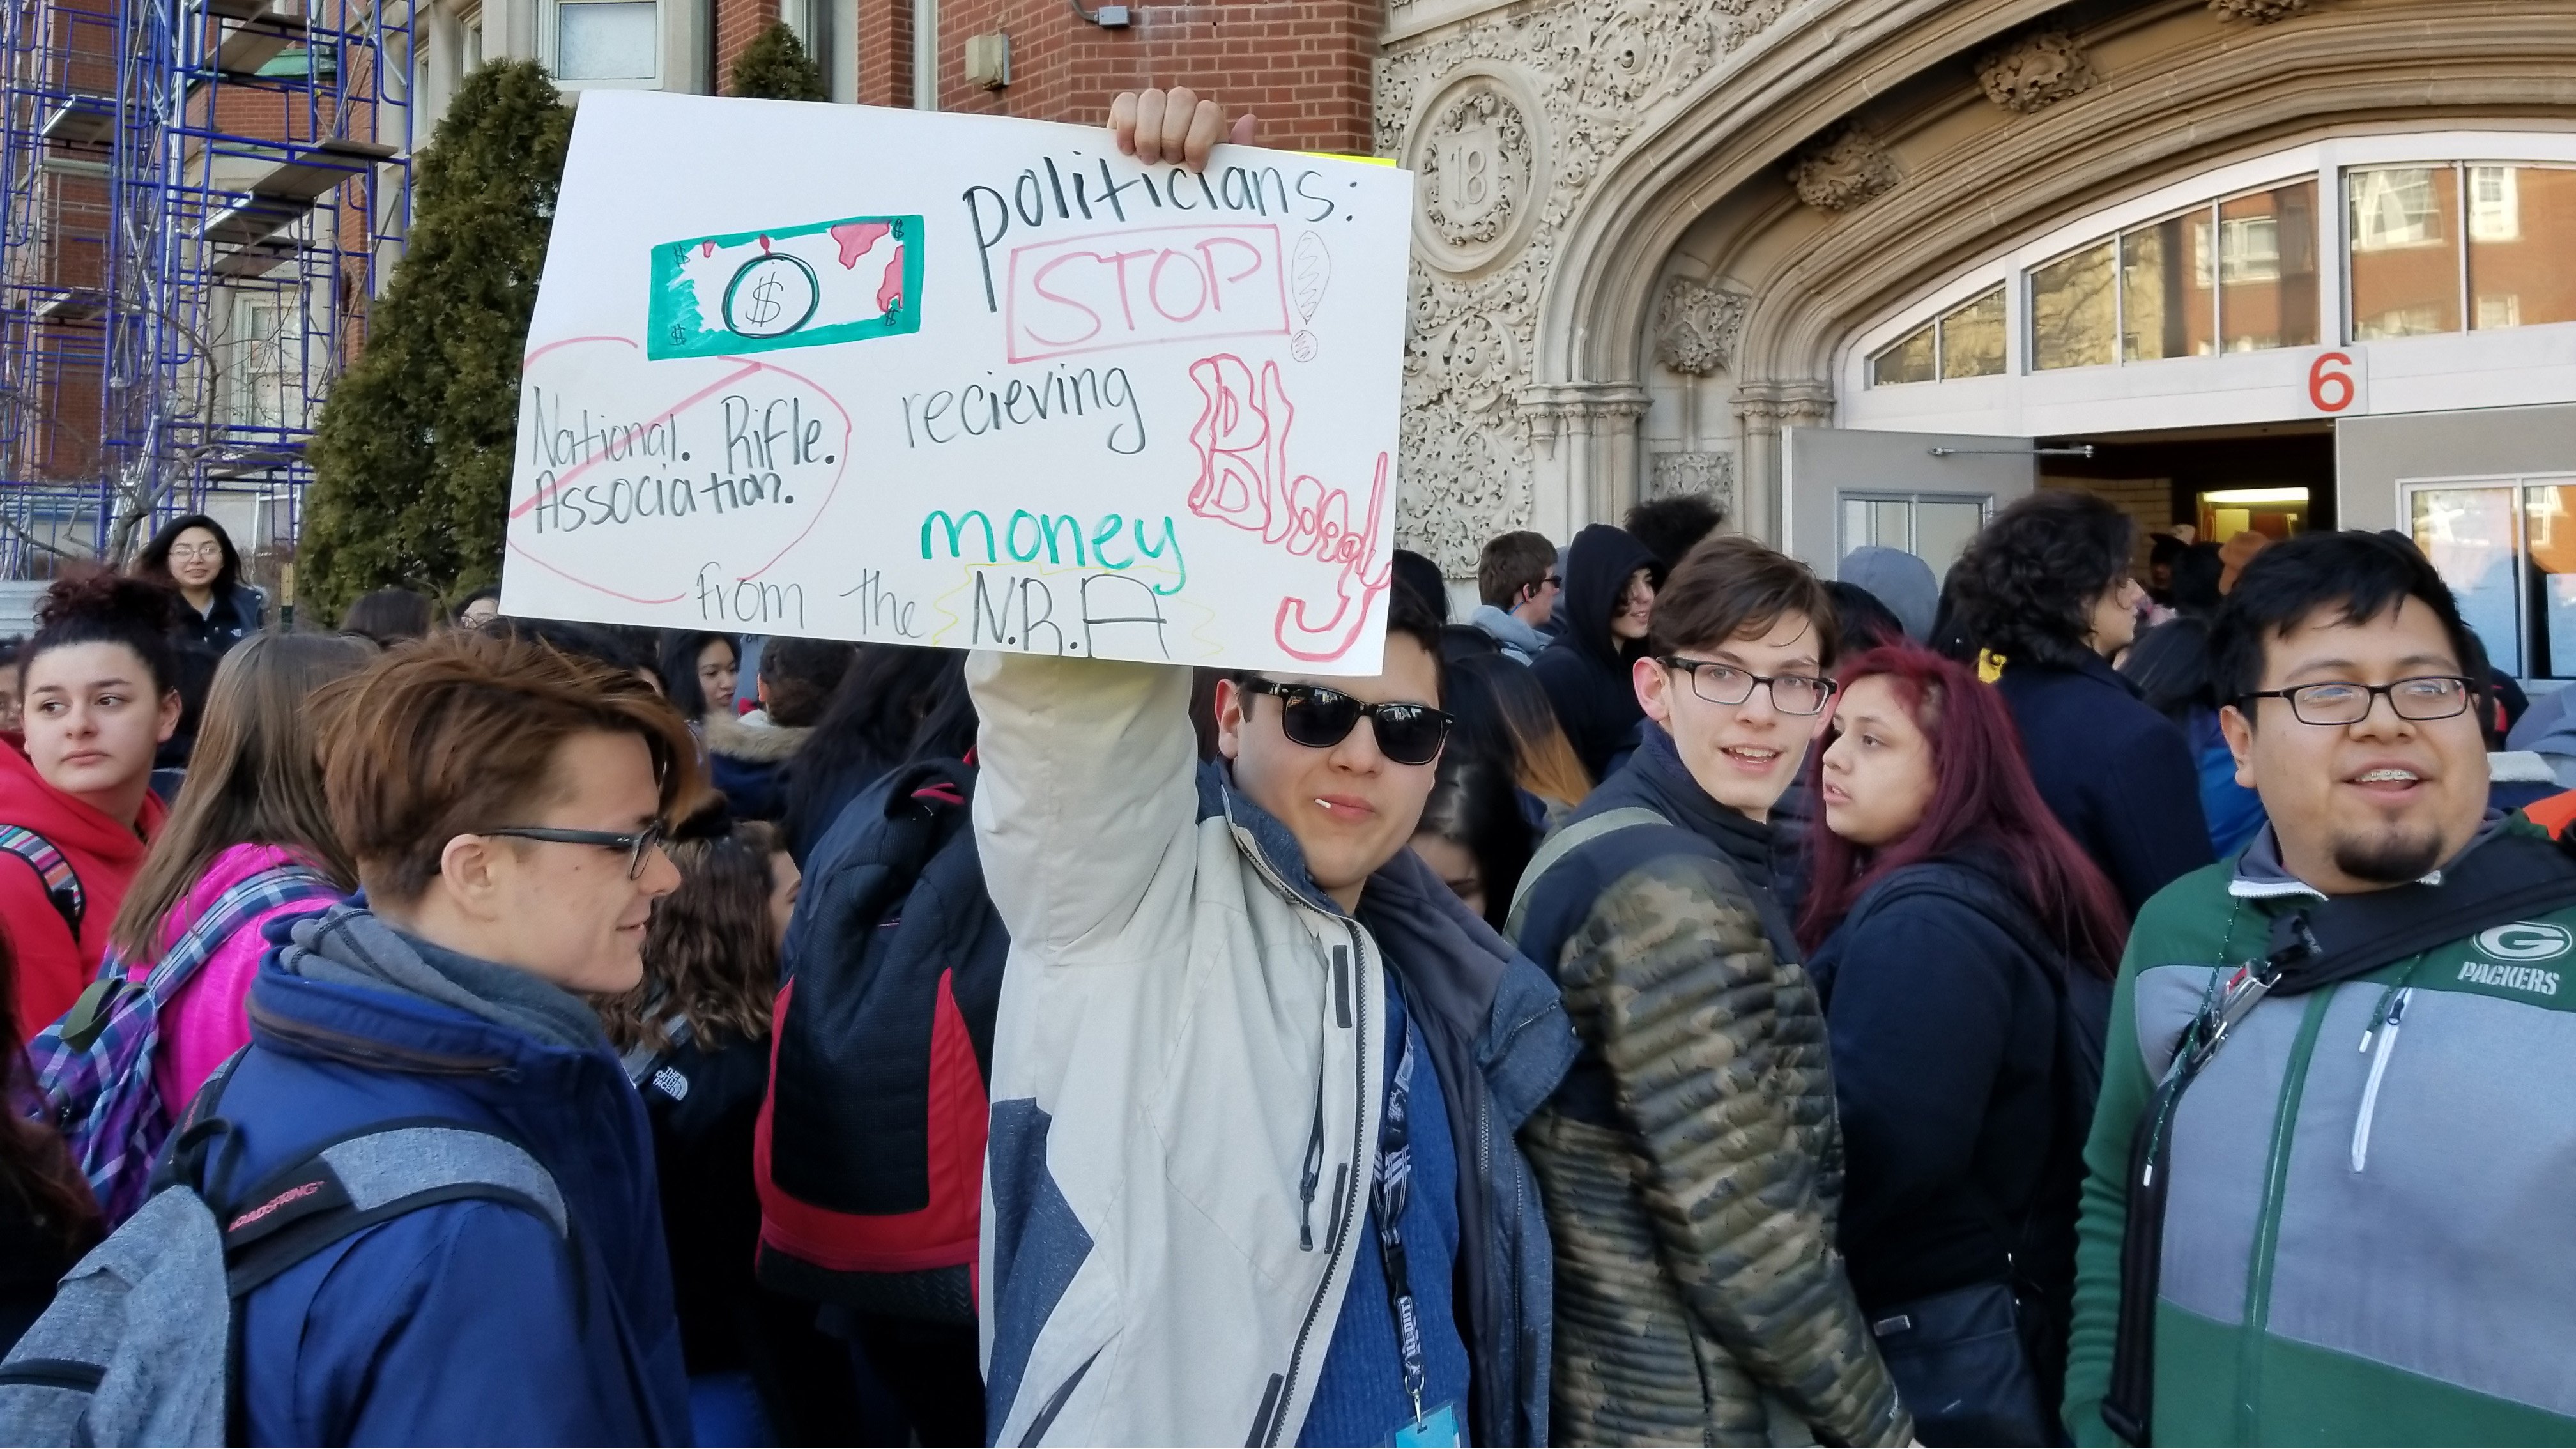 Students at Lake View High School joined their peers across the city and the nation Wednesday in a walkout protest demanding an end to gun violence. (Matt Masterson / Chicago Tonight)